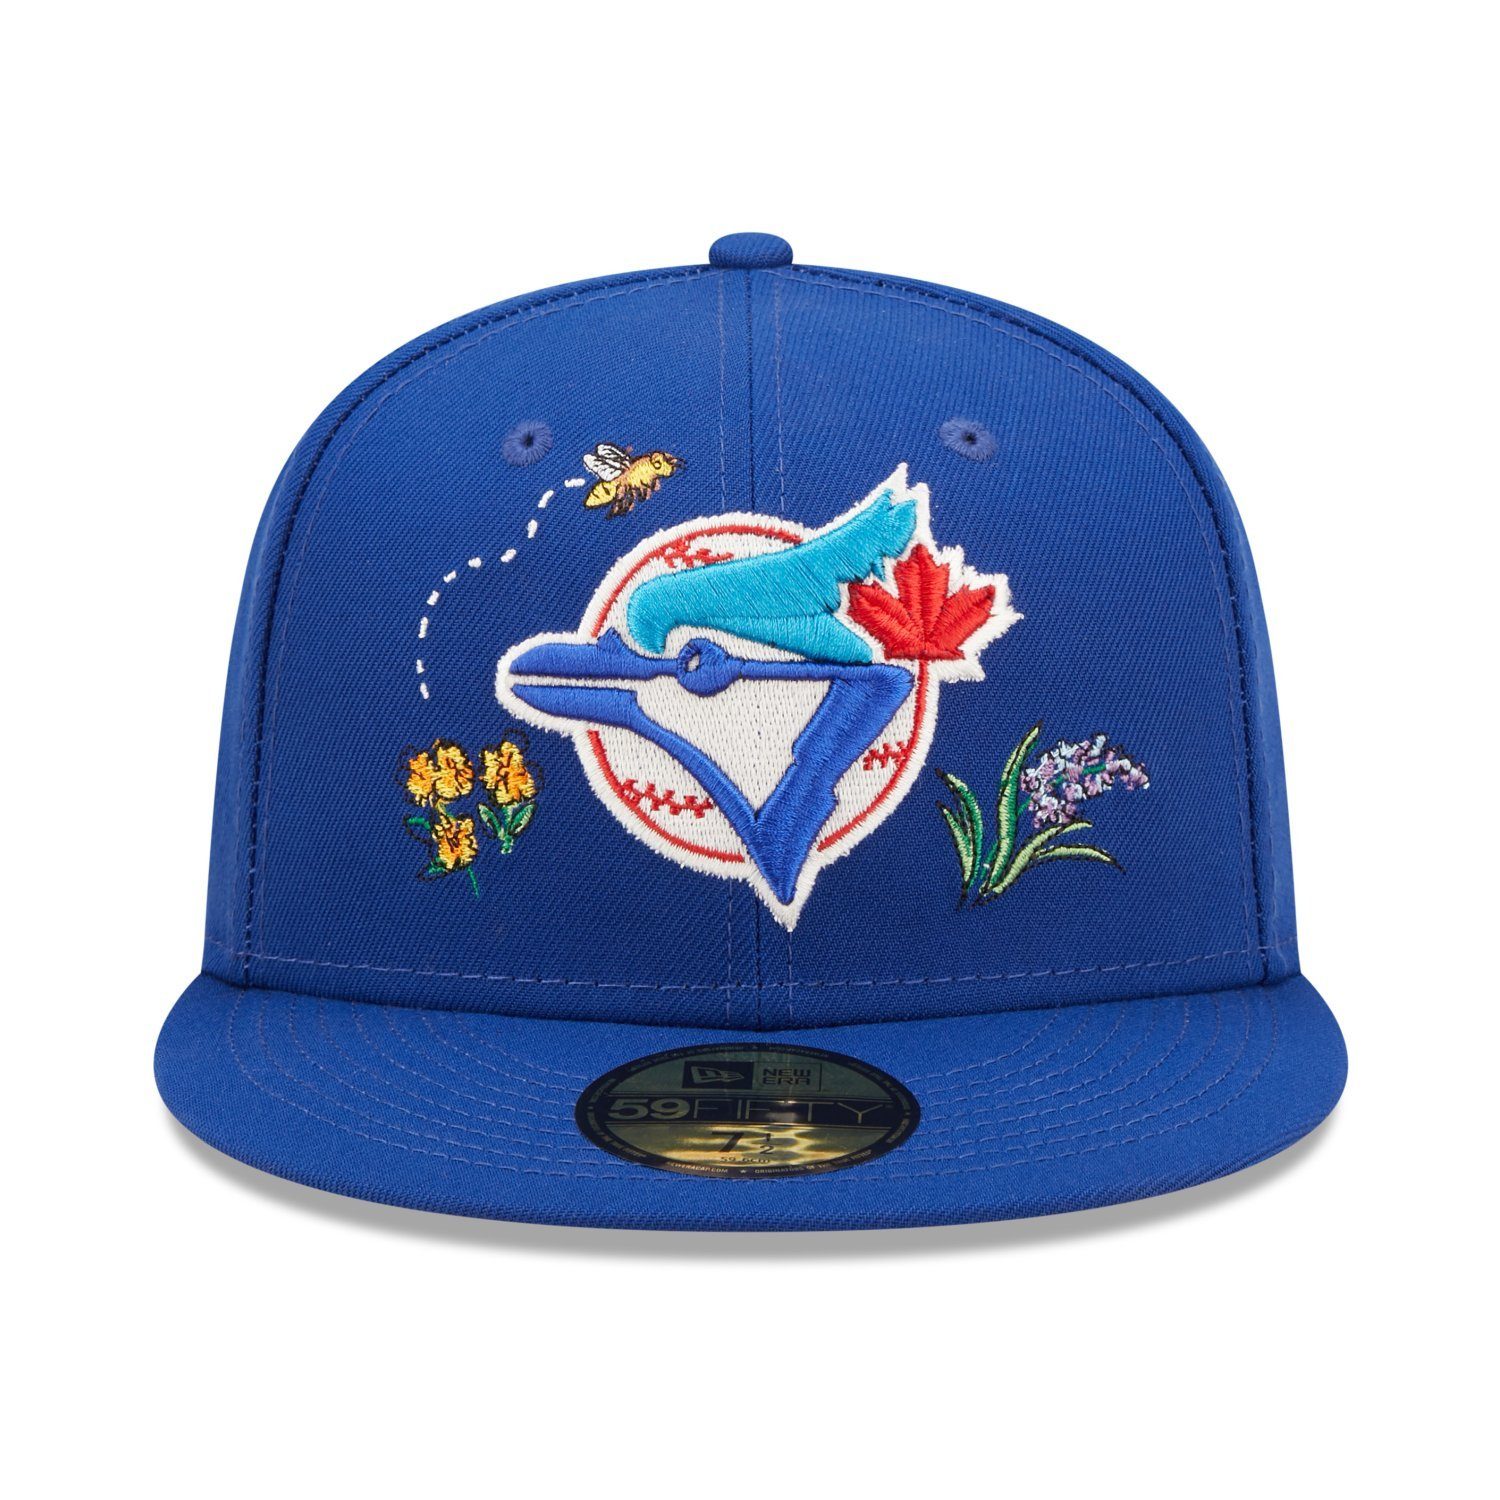 Fitted Toronto blau FLORAL WATER Jays Era Cap New 59Fifty